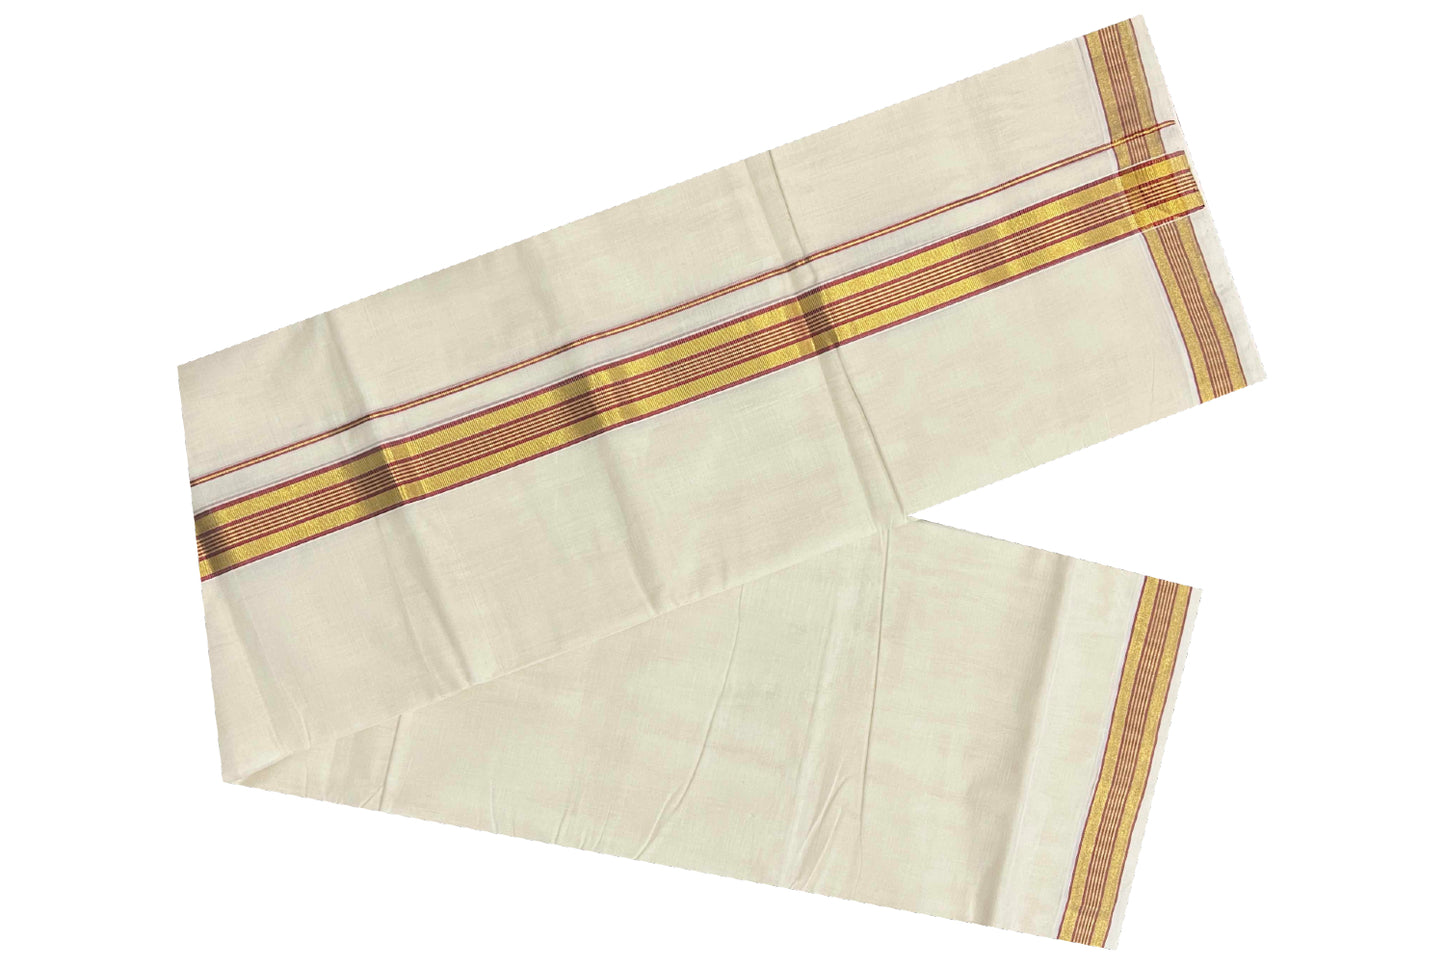 Southloom Kuthampully Handloom Pure Cotton Mundu with Golden and Red Kasavu Lines Border (South Indian Dhoti)